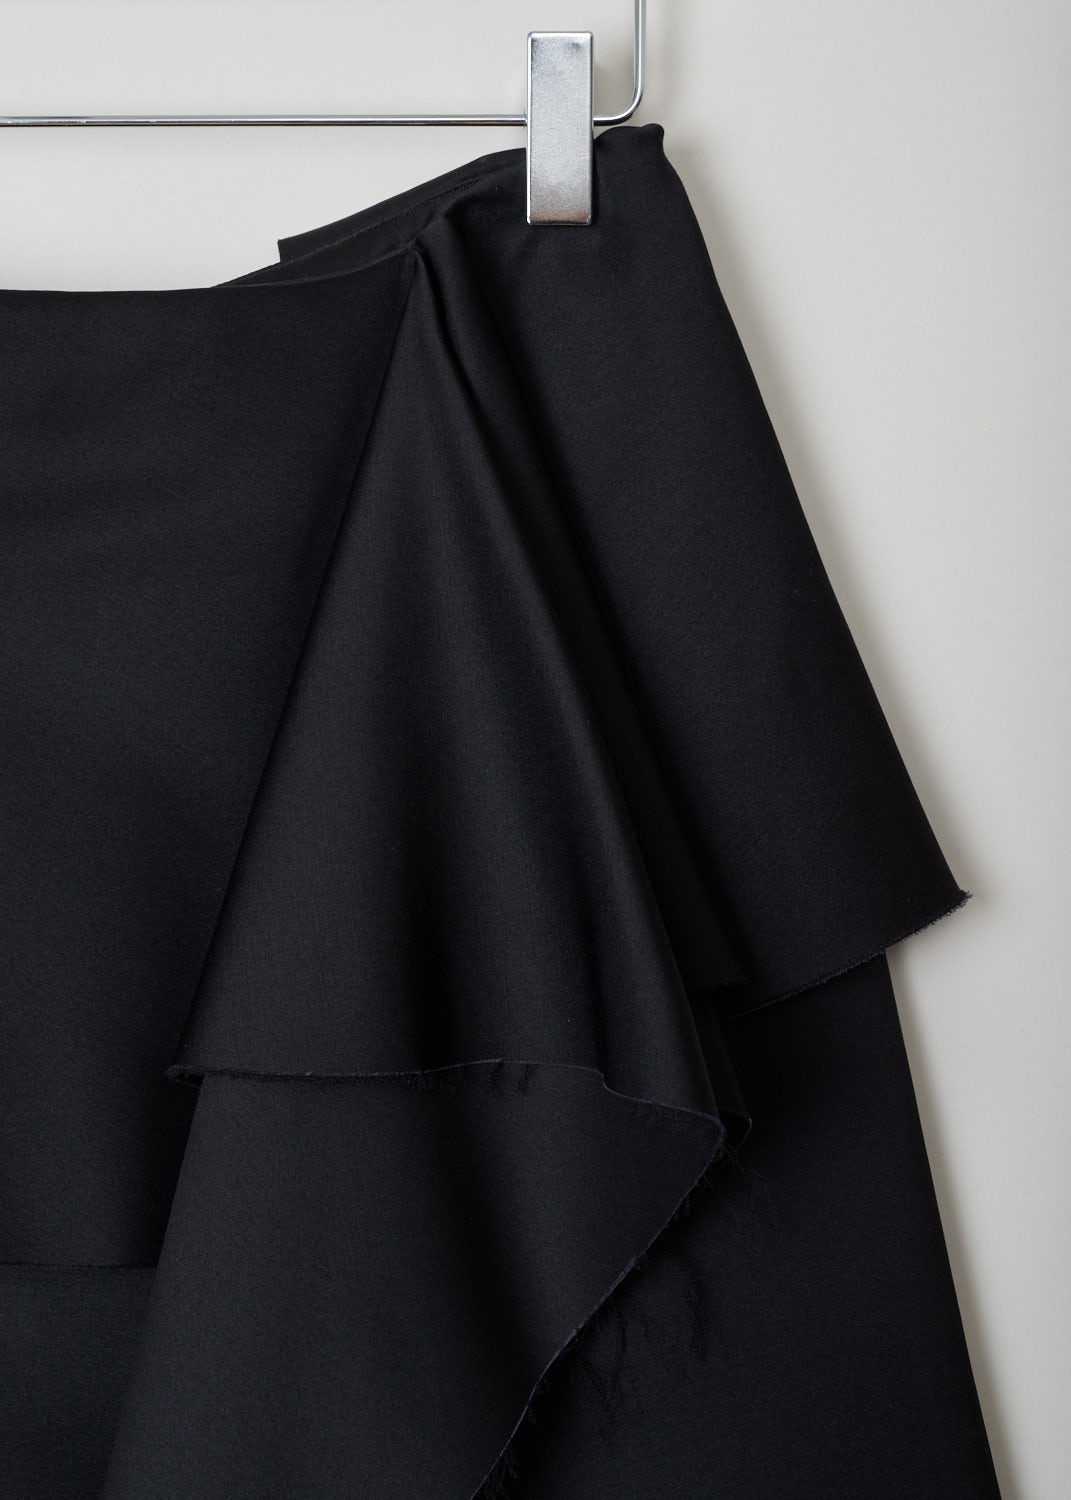 Marni, Black satin A-line skirt, GOMAT64JY0_TSD60_00N99_black, black, detail1, Black a-line skirt crafted from satin fabric. All the edges of the fabric are frilled and unfinished, featuring similarities with a wrap skirt. Furthermore a concealed zip fastening can be found on the back. 